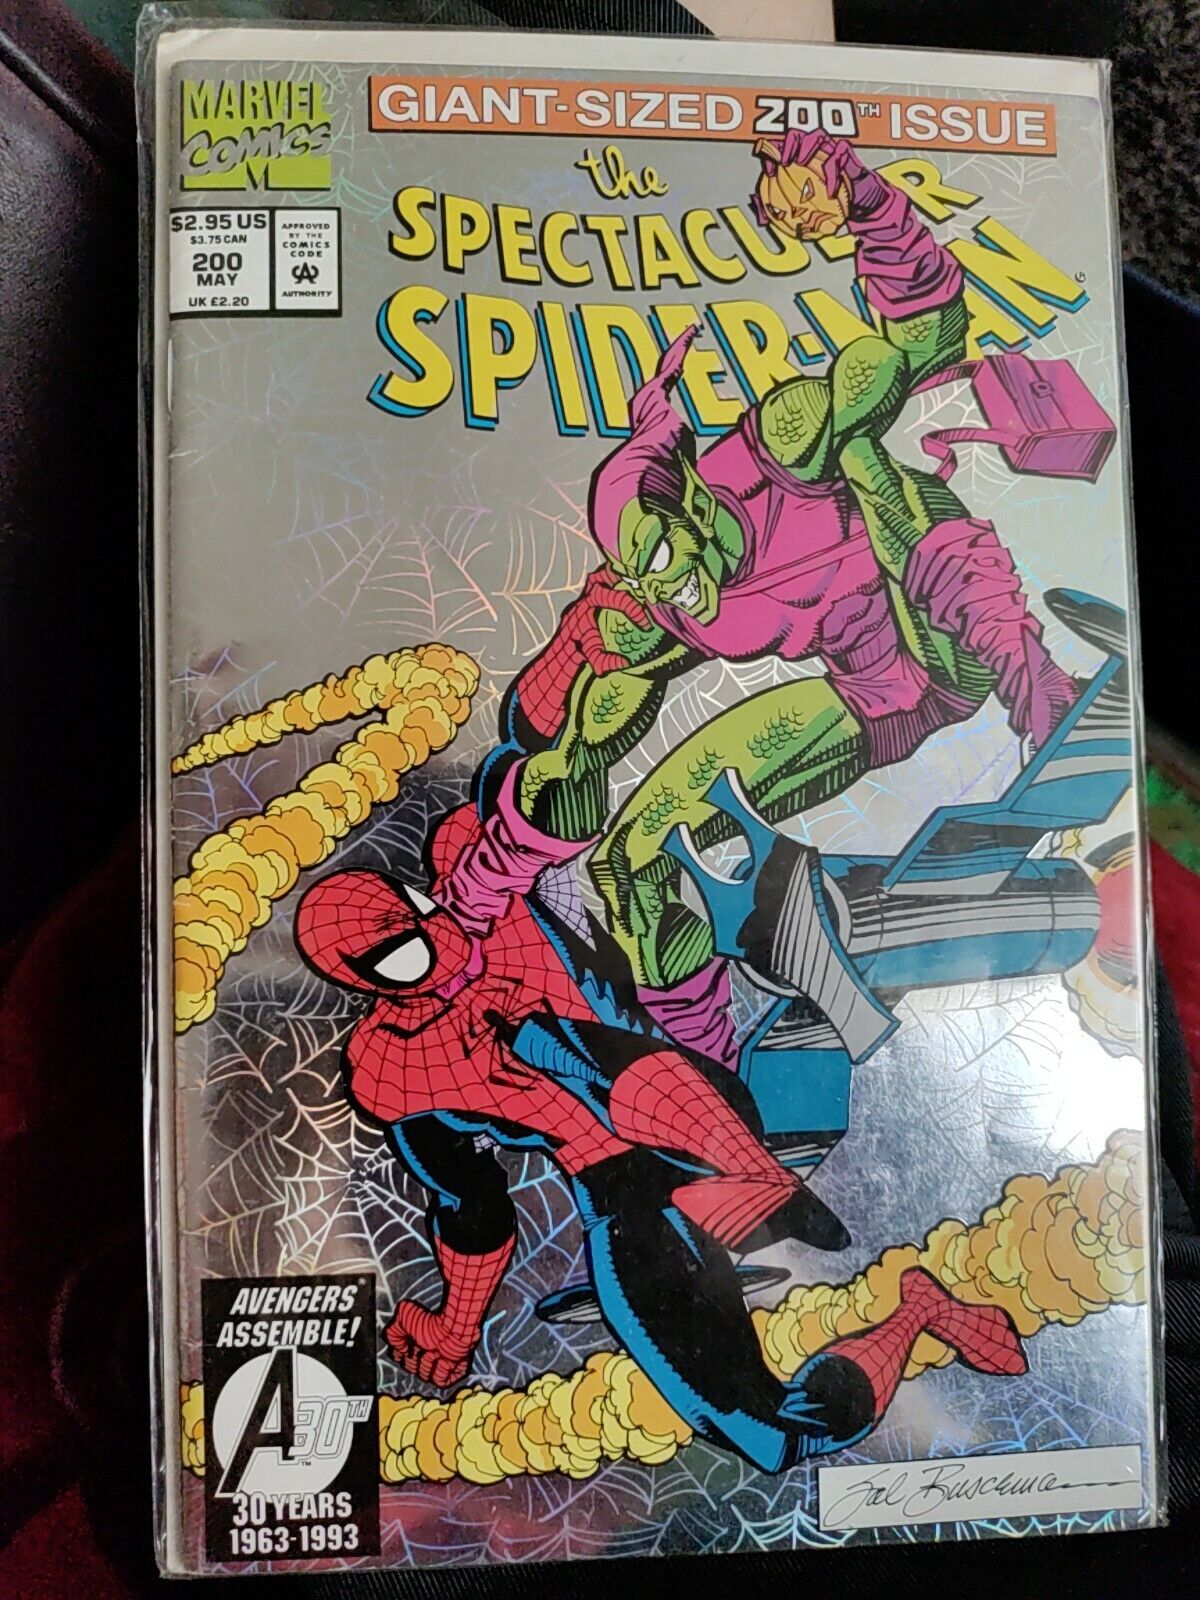 The Spectacular Spider-Man Giant-Sized 200th Issue 1993 Green Goblin